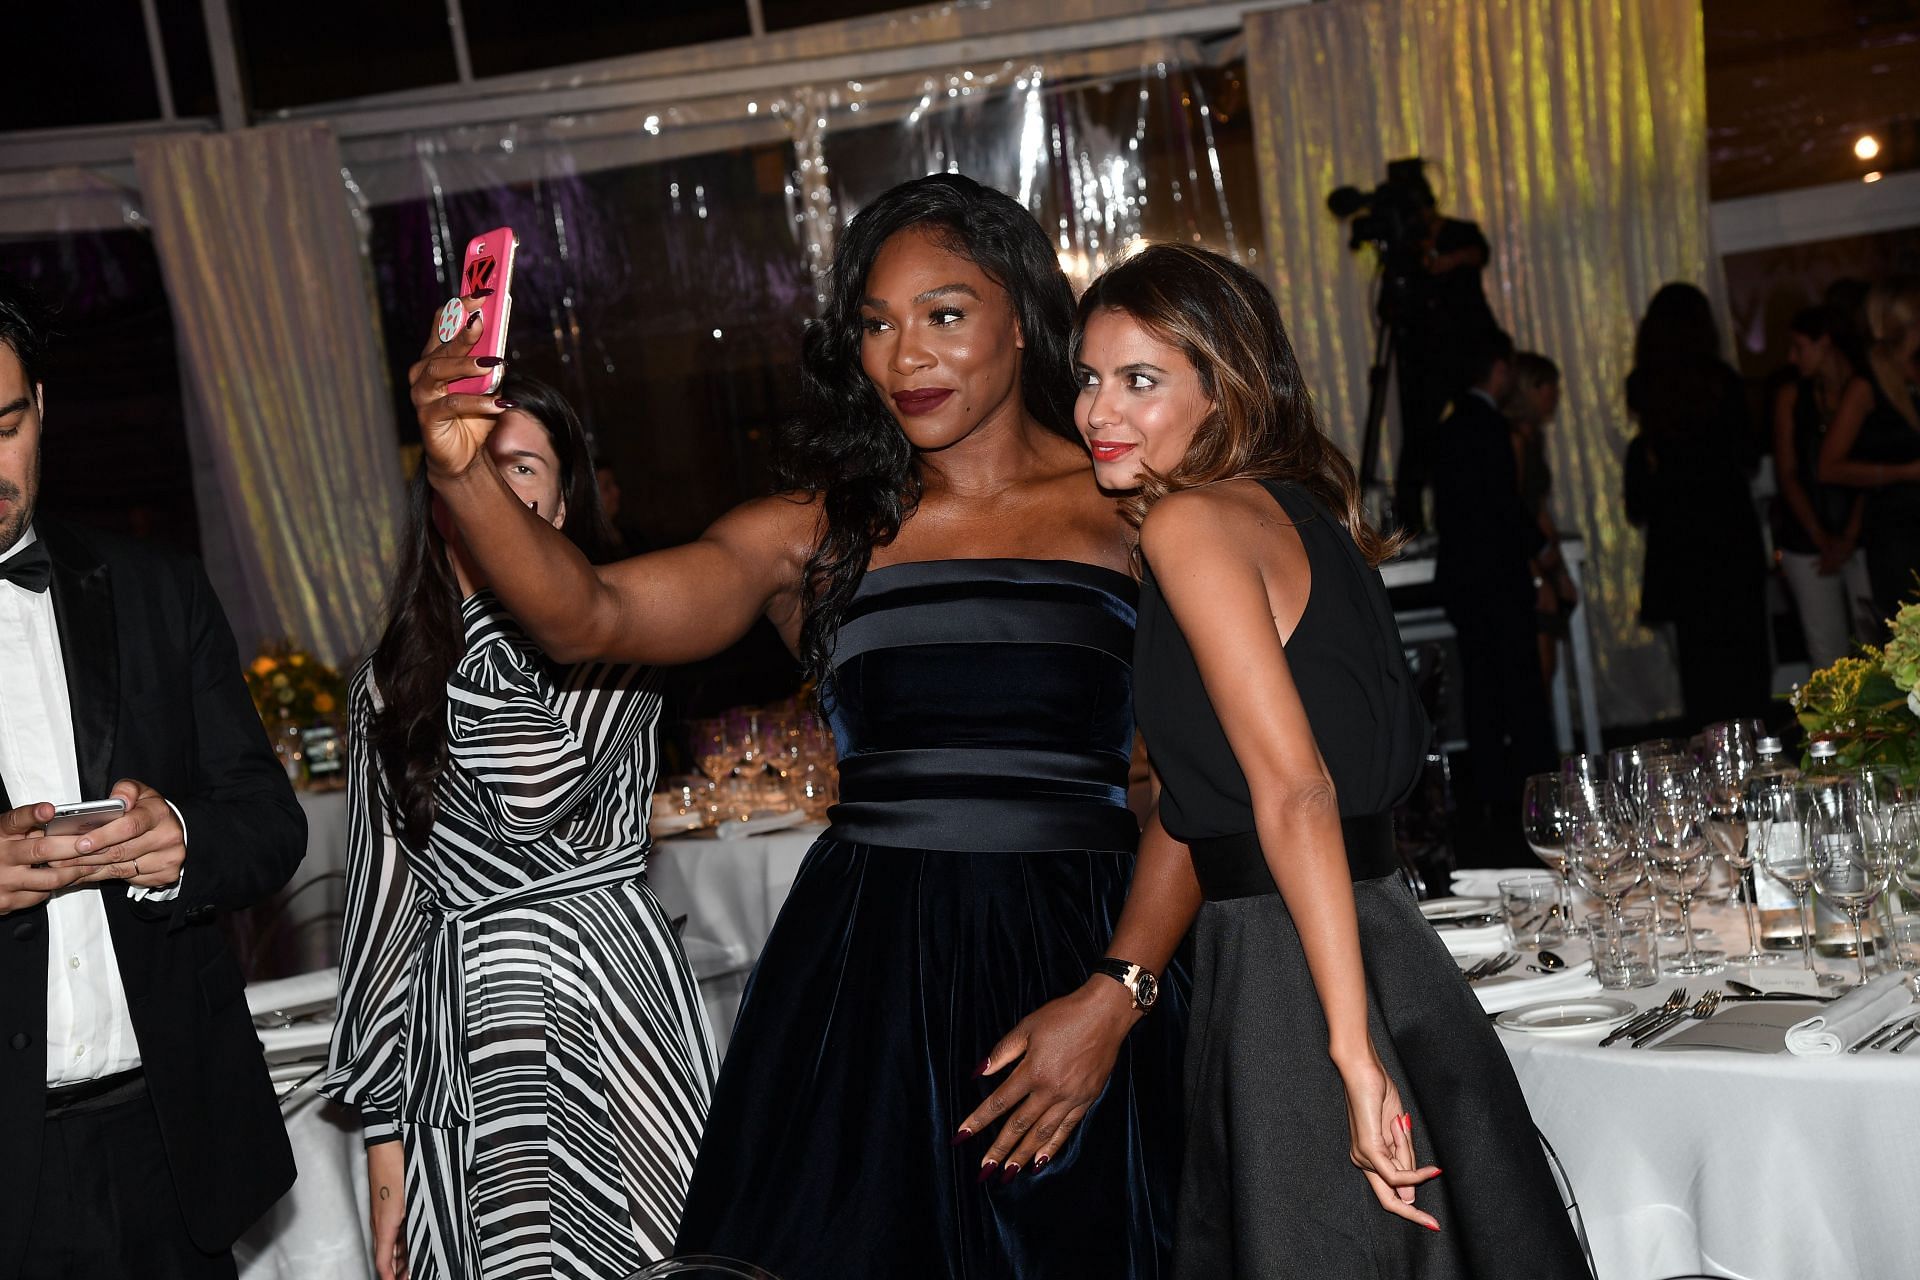 Serena Williams to be honored as a fashion icon at the 2022 FIT gala in April